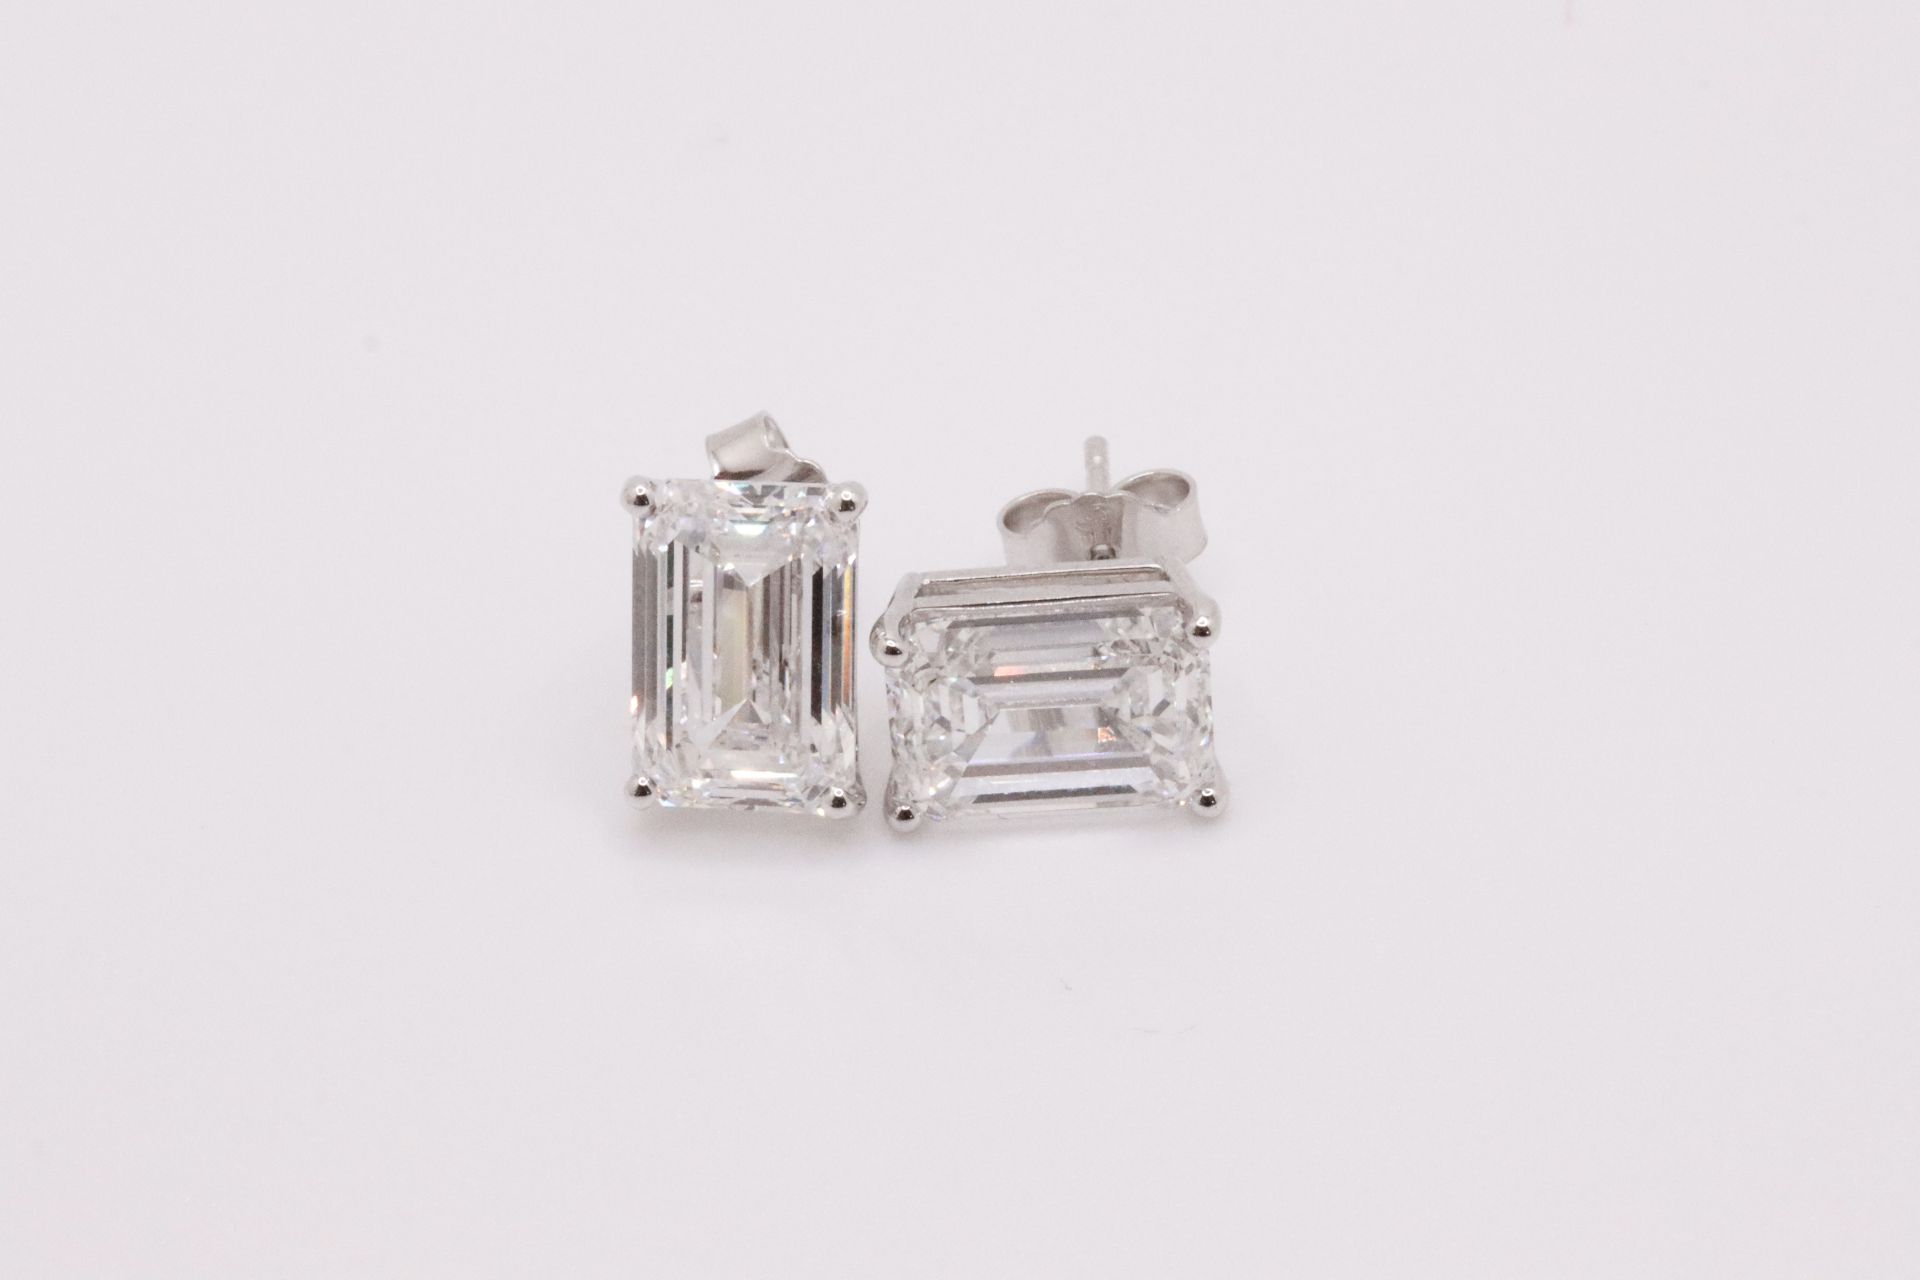 Emerald Cut 4.00 Carat Natural Diamond Earrings 18kt White Gold - Colour H - SI Clarity- GIA - Image 6 of 7